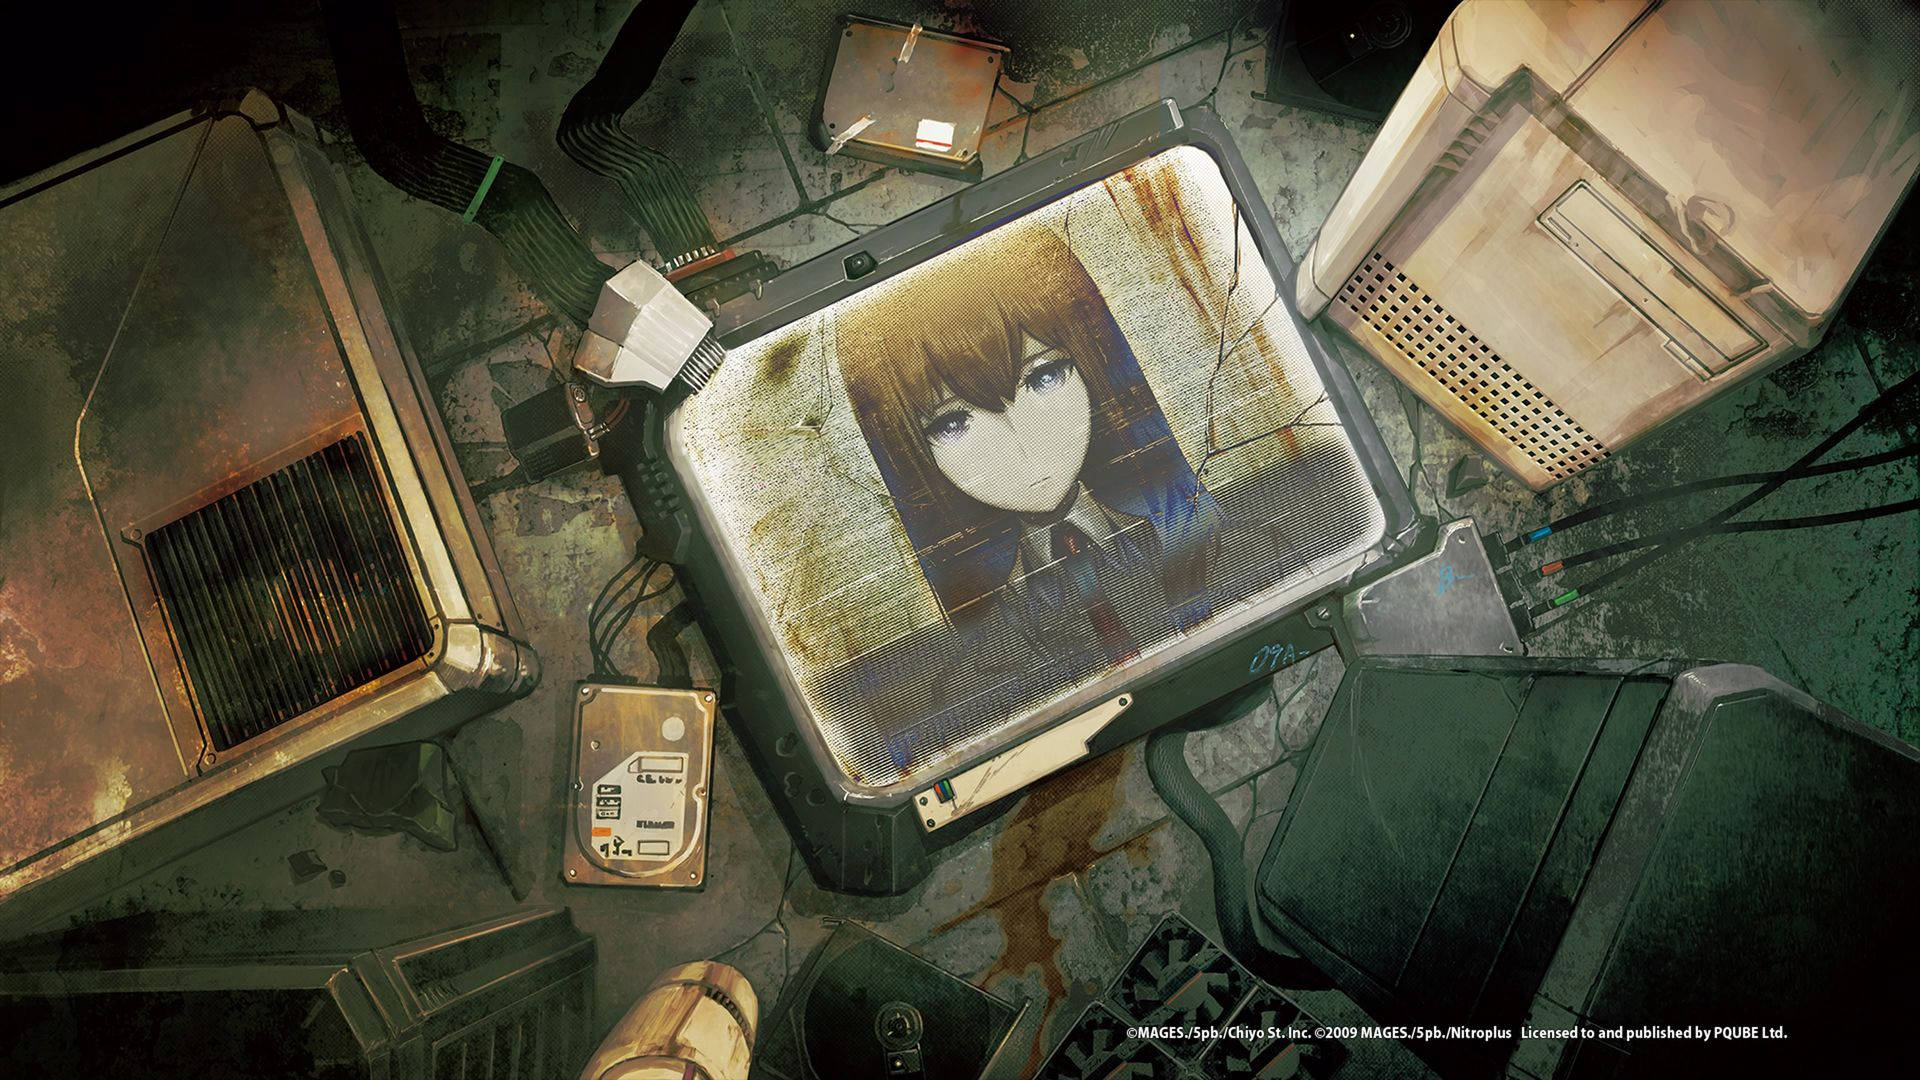 Makise Kurisu, the protagonist of Steins;Gate pictured in front of a monitor. Wallpaper